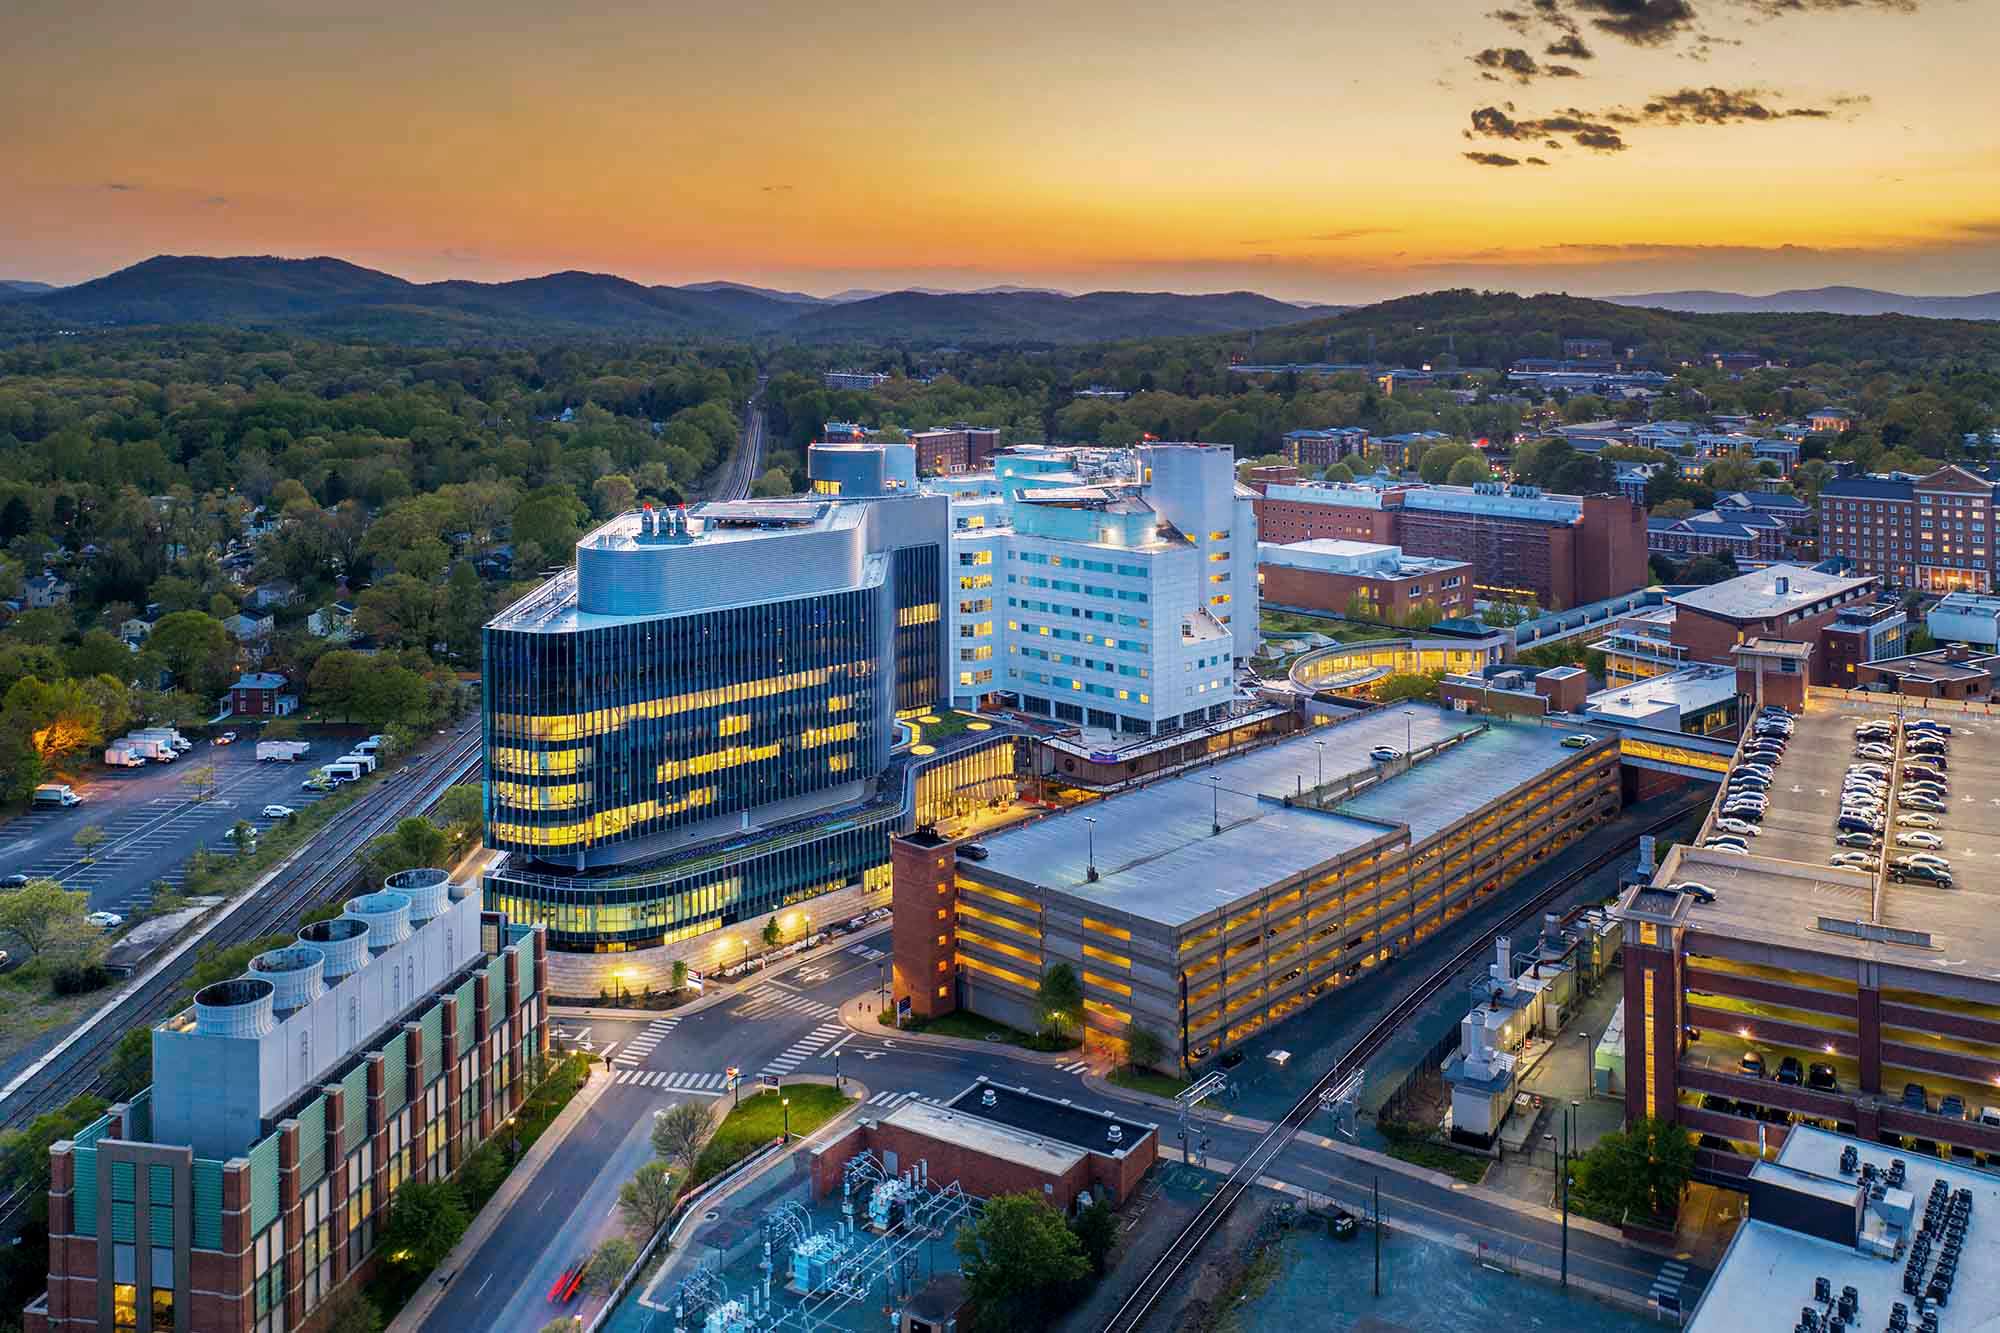 The UVA Health system as seen from above during sunset